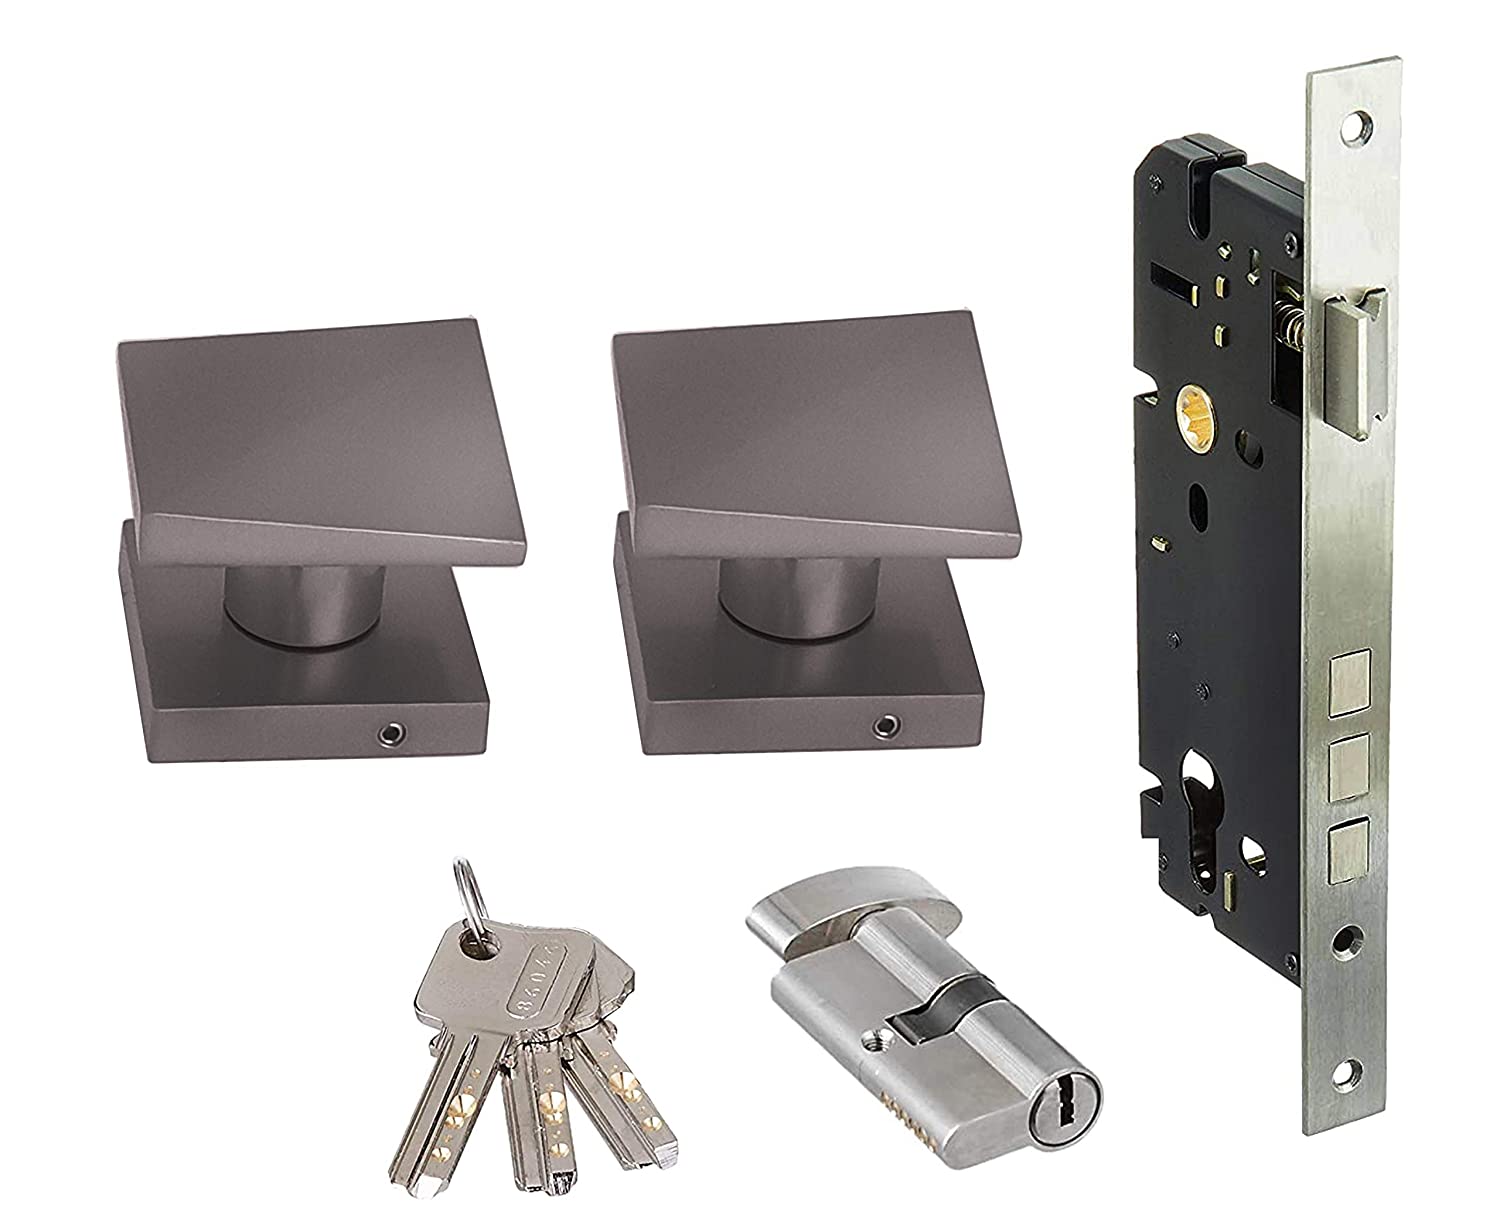 Aquieen Square MH 7064 Mortise Handle with 2 Stage Cylindrical Lock & 2 Key Set (Satin Black)